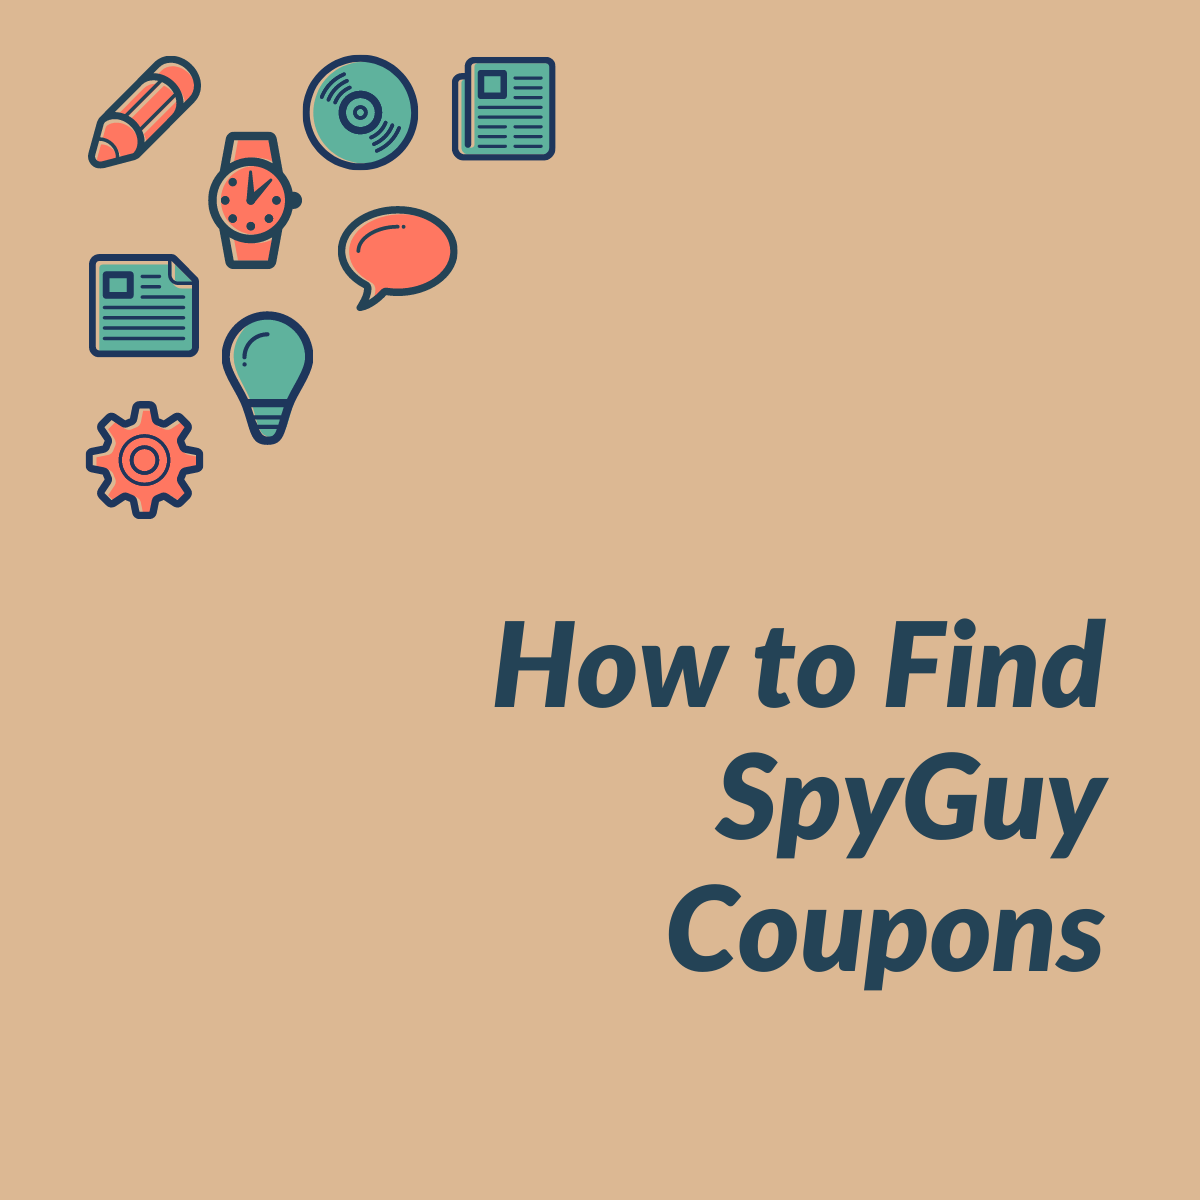 How to Find SpyGuy Coupons